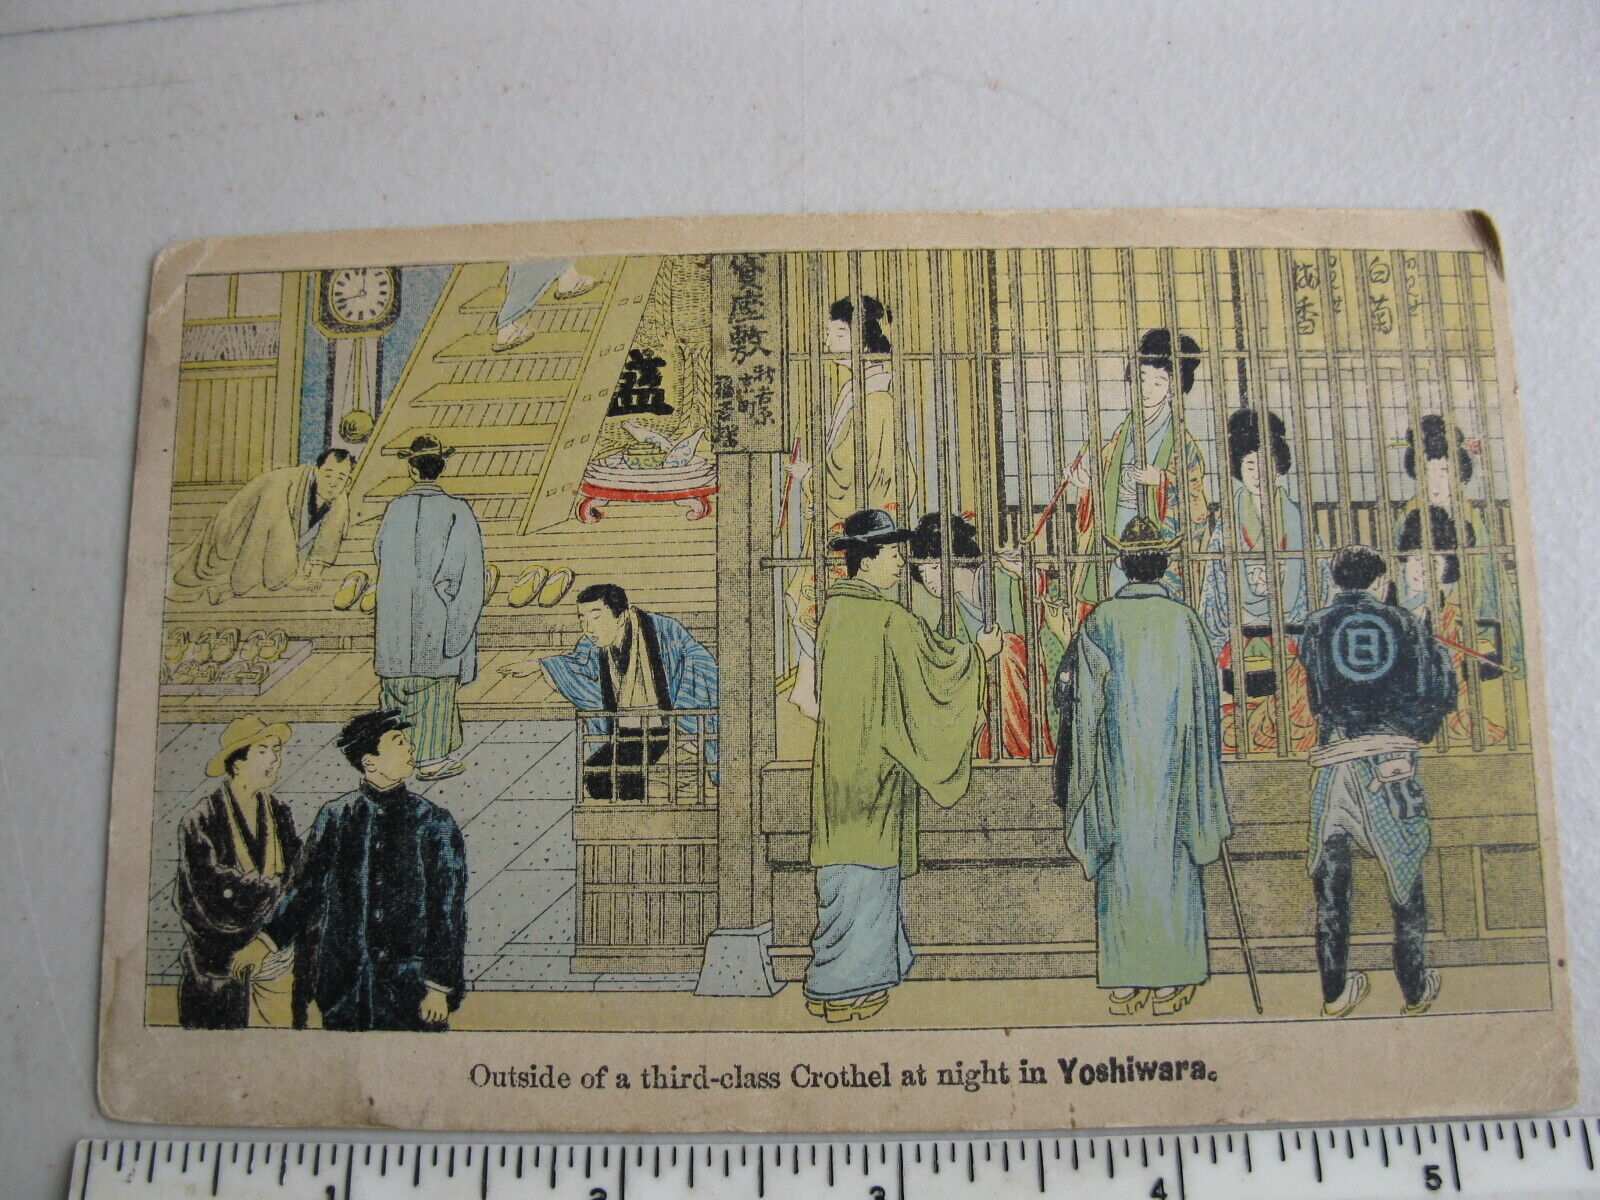 Vintage Postcard of a Japanese 3rd Class Brothel in Yoshiwara (Prostitutes) 